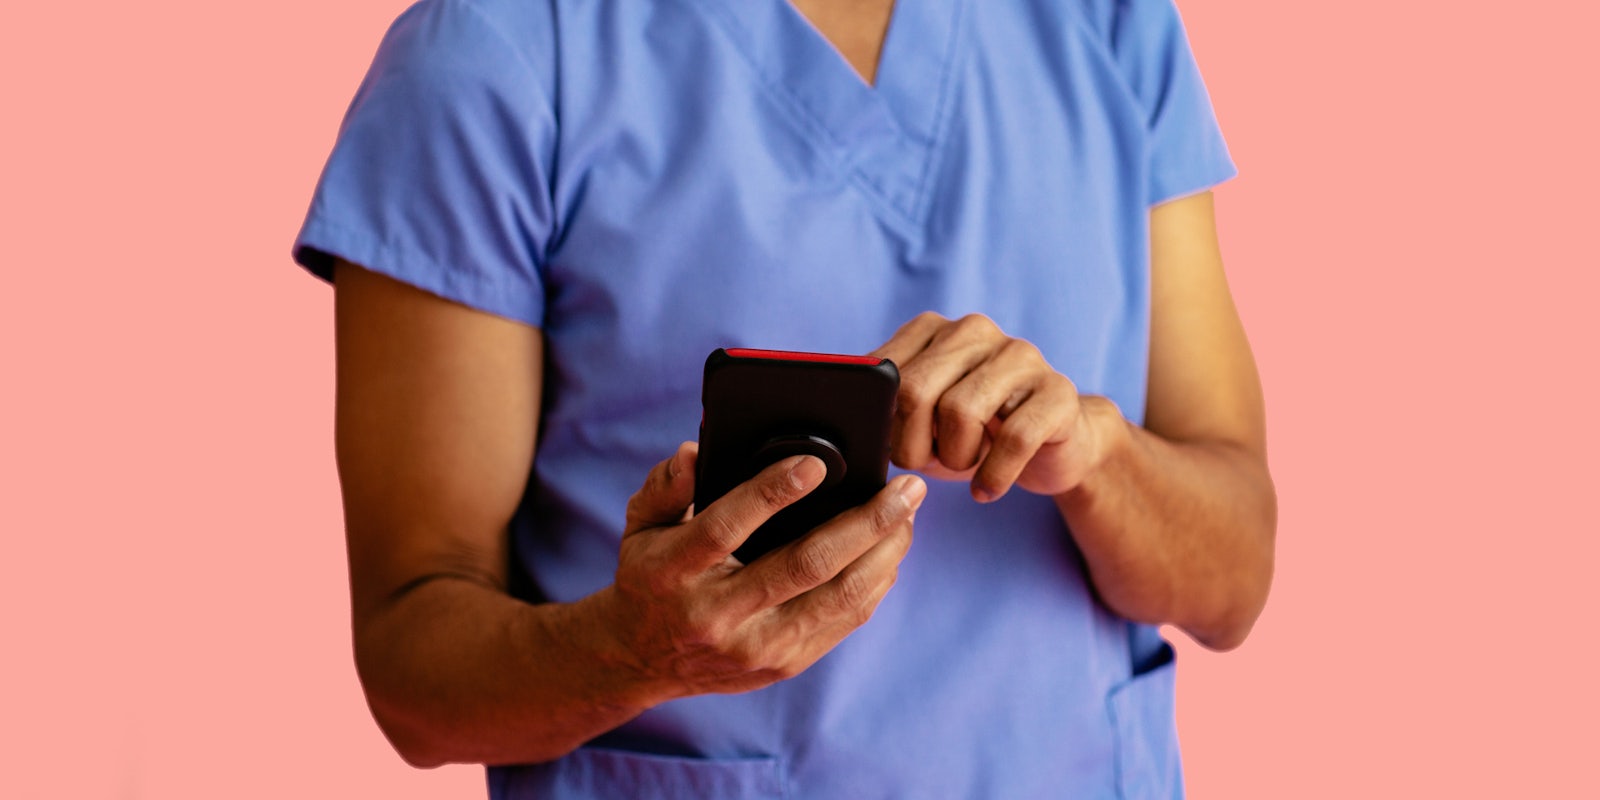 nurse holding cell phone on light pink background